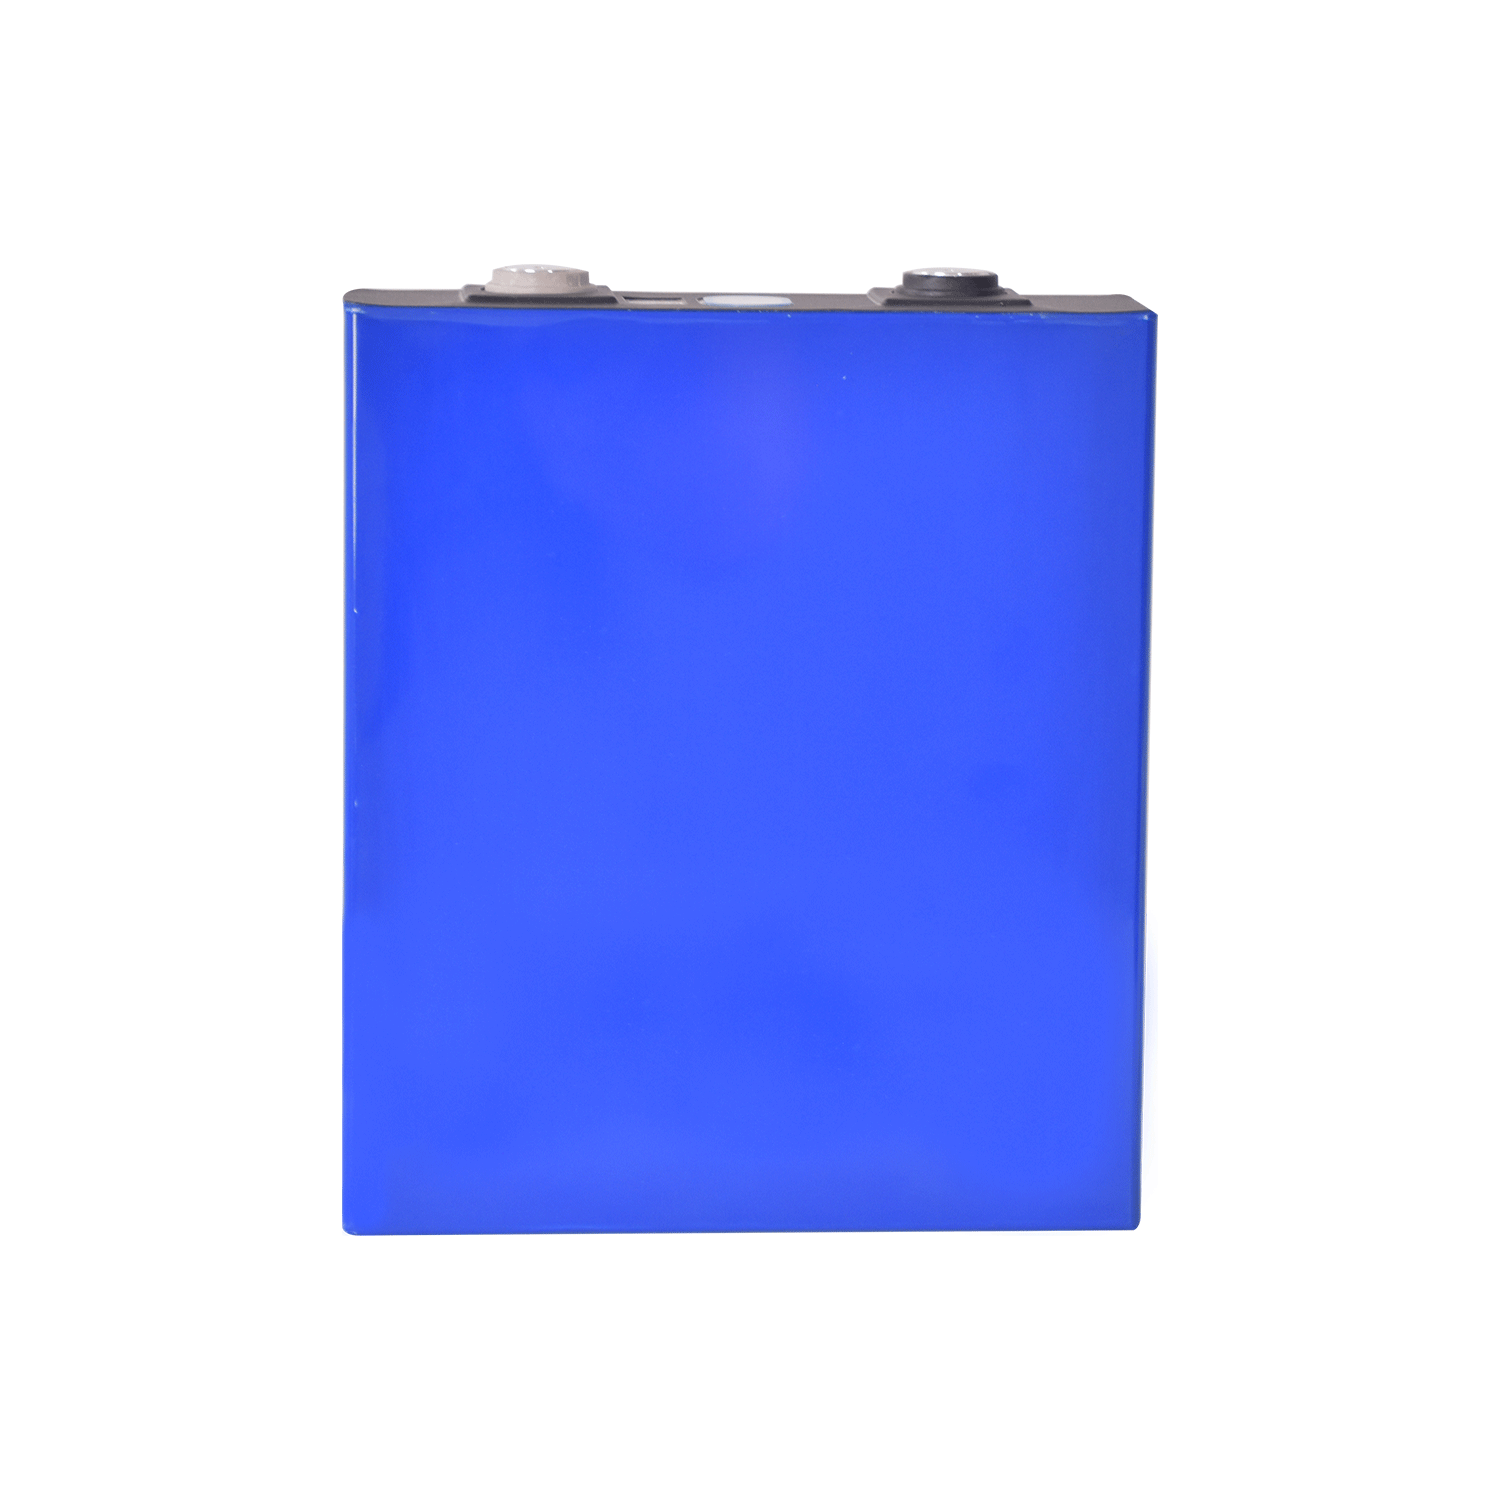 odm lithium ion battery long life manufacturer